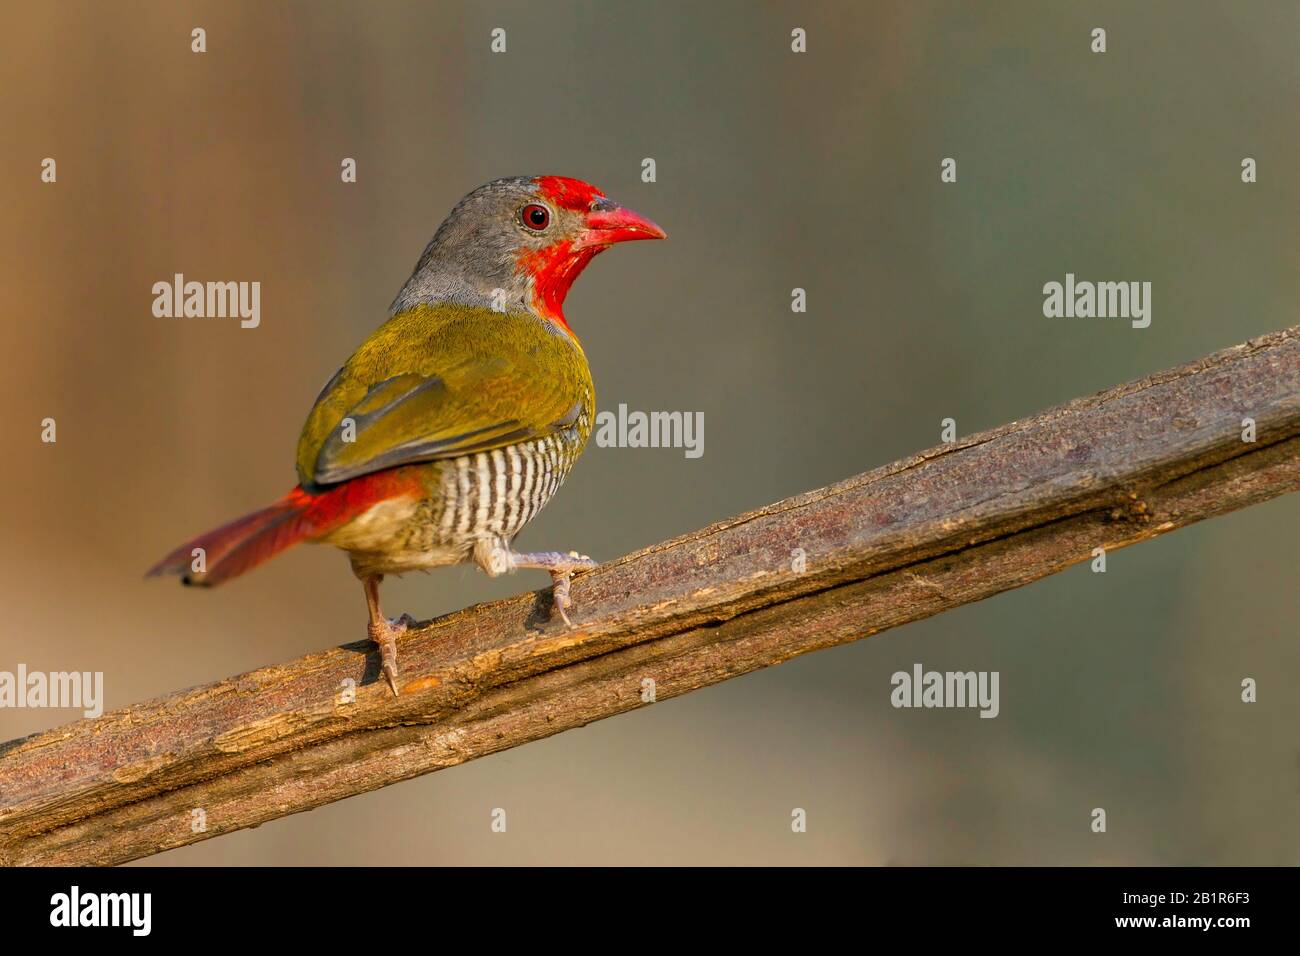 green-winged pytilia (Pytilia melba), perched on a branch, Africa Stock Photo